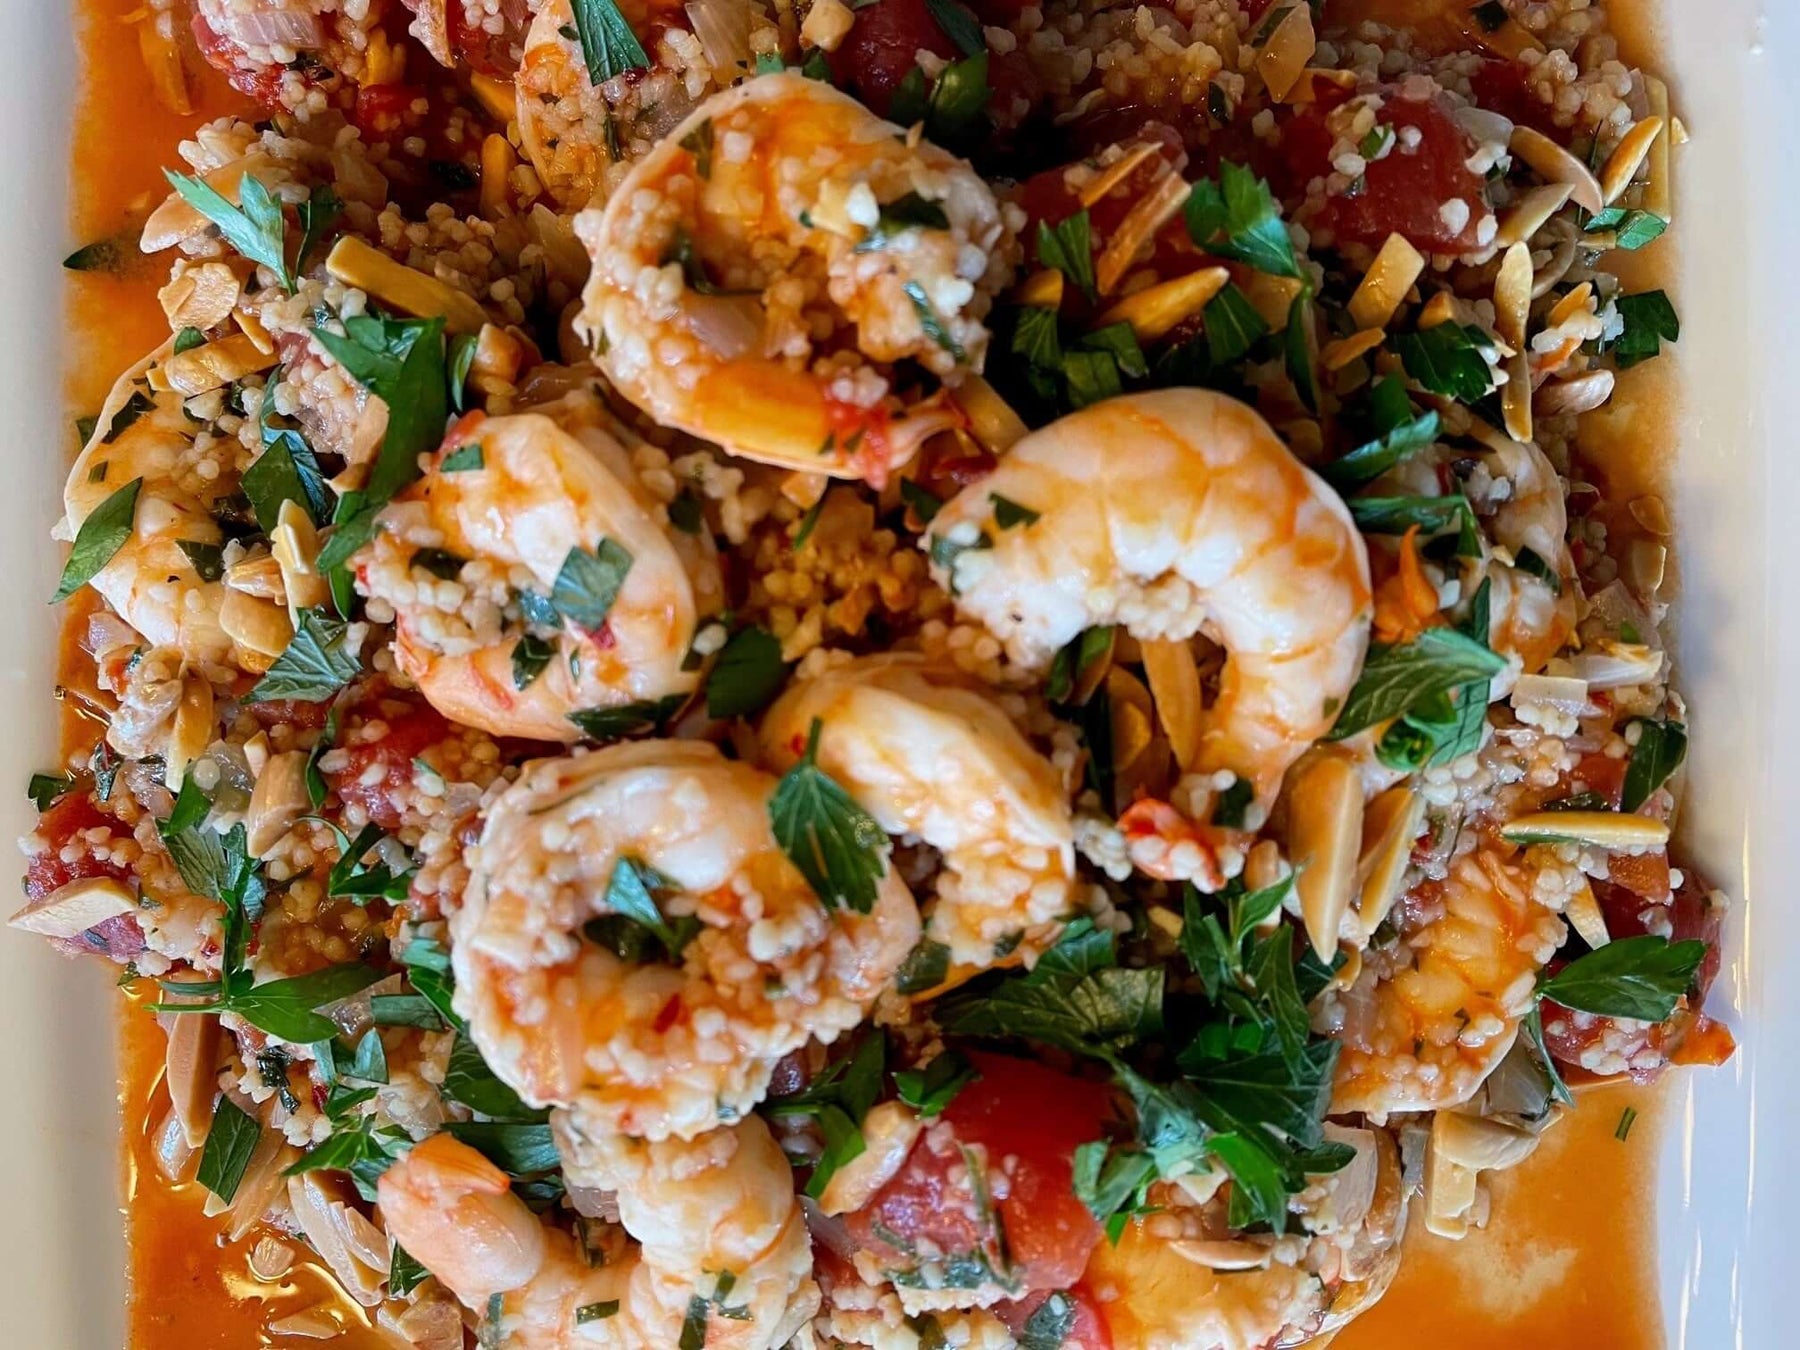 Mediterranean Couscous with Shrimp and Tomato